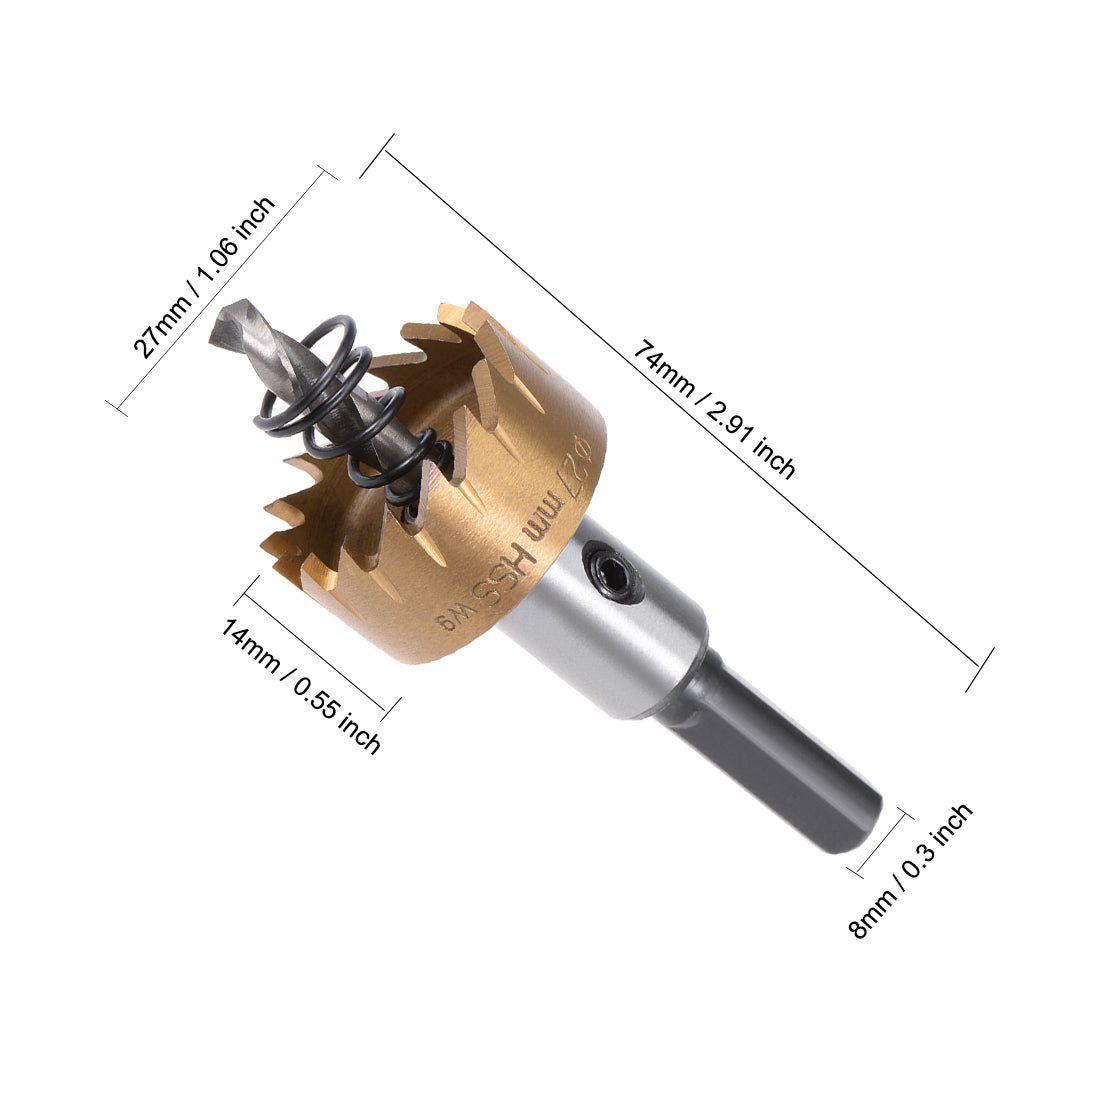 Uxcell Uxcell 28mm HSS Drill Bit Hole Saw Stainless High Speed Steel Metal Alloy